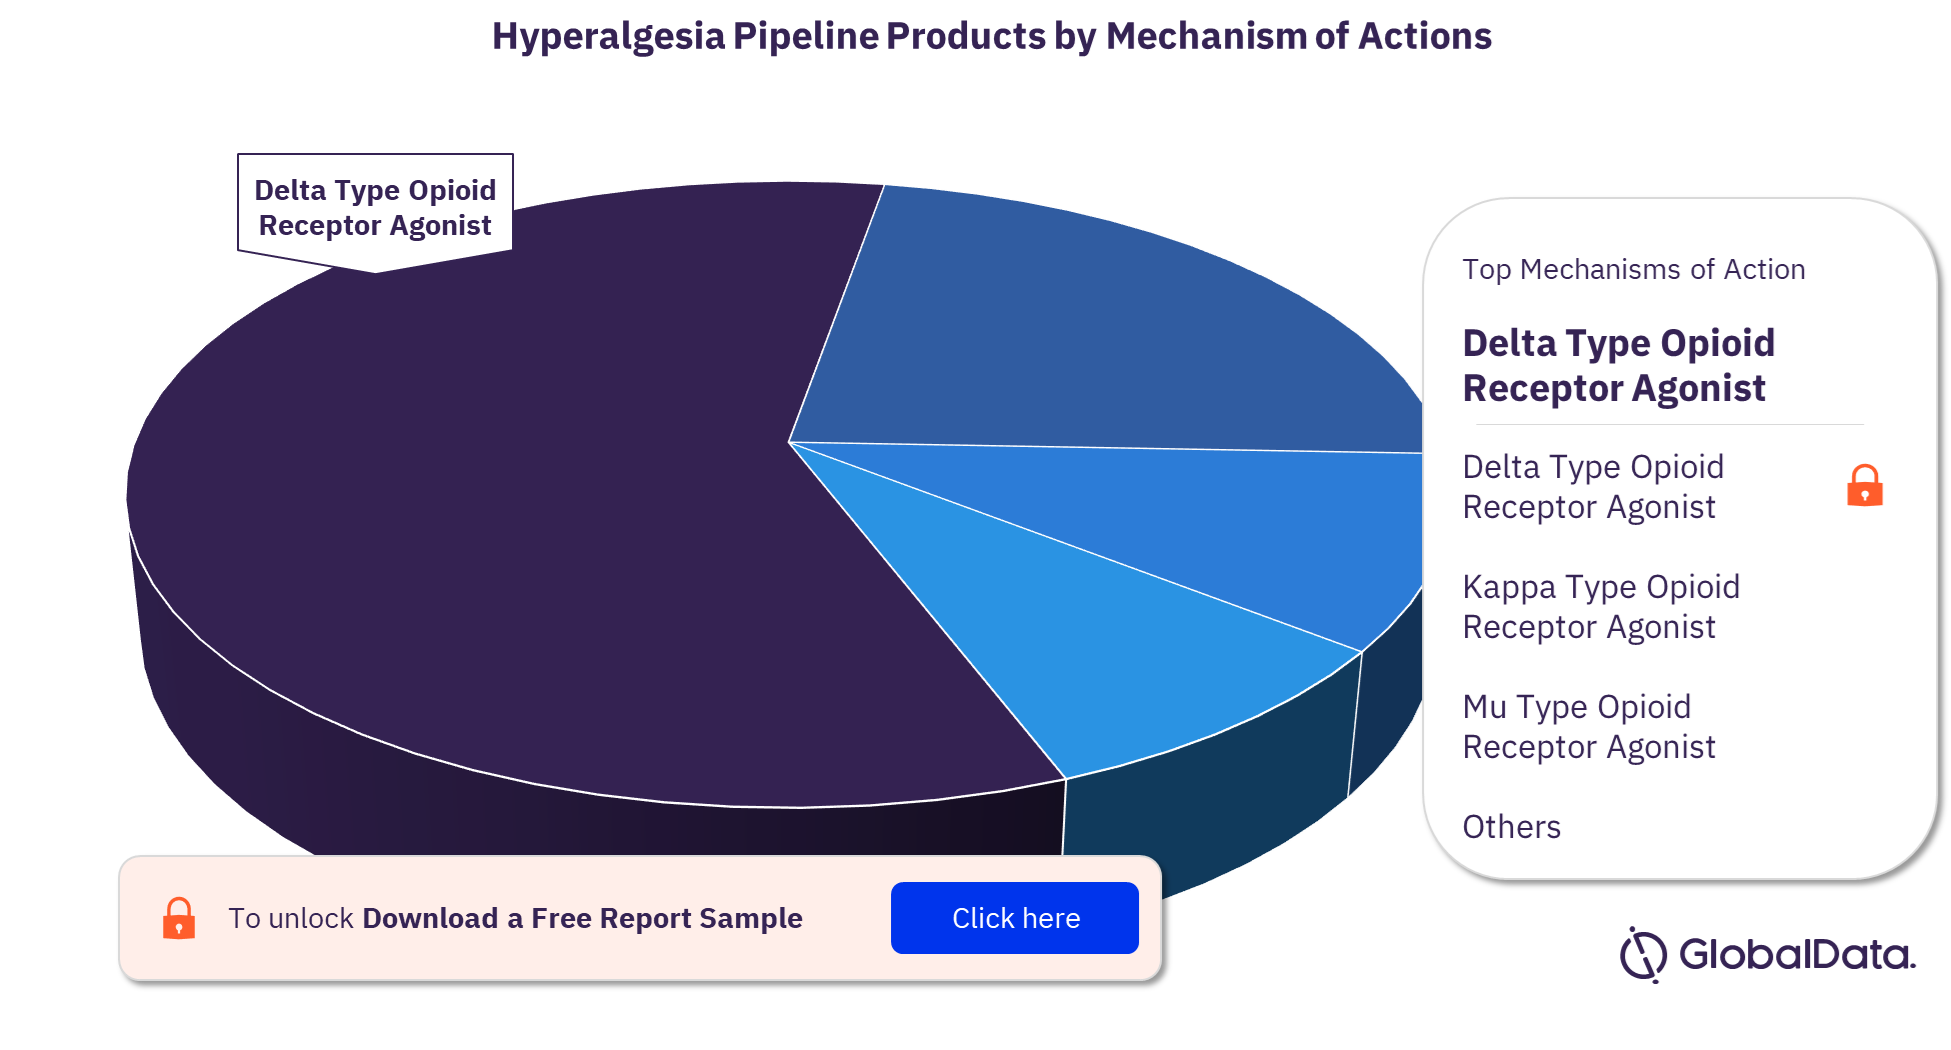 Hyperalgesia pipeline drugs market, by mechanisms of action